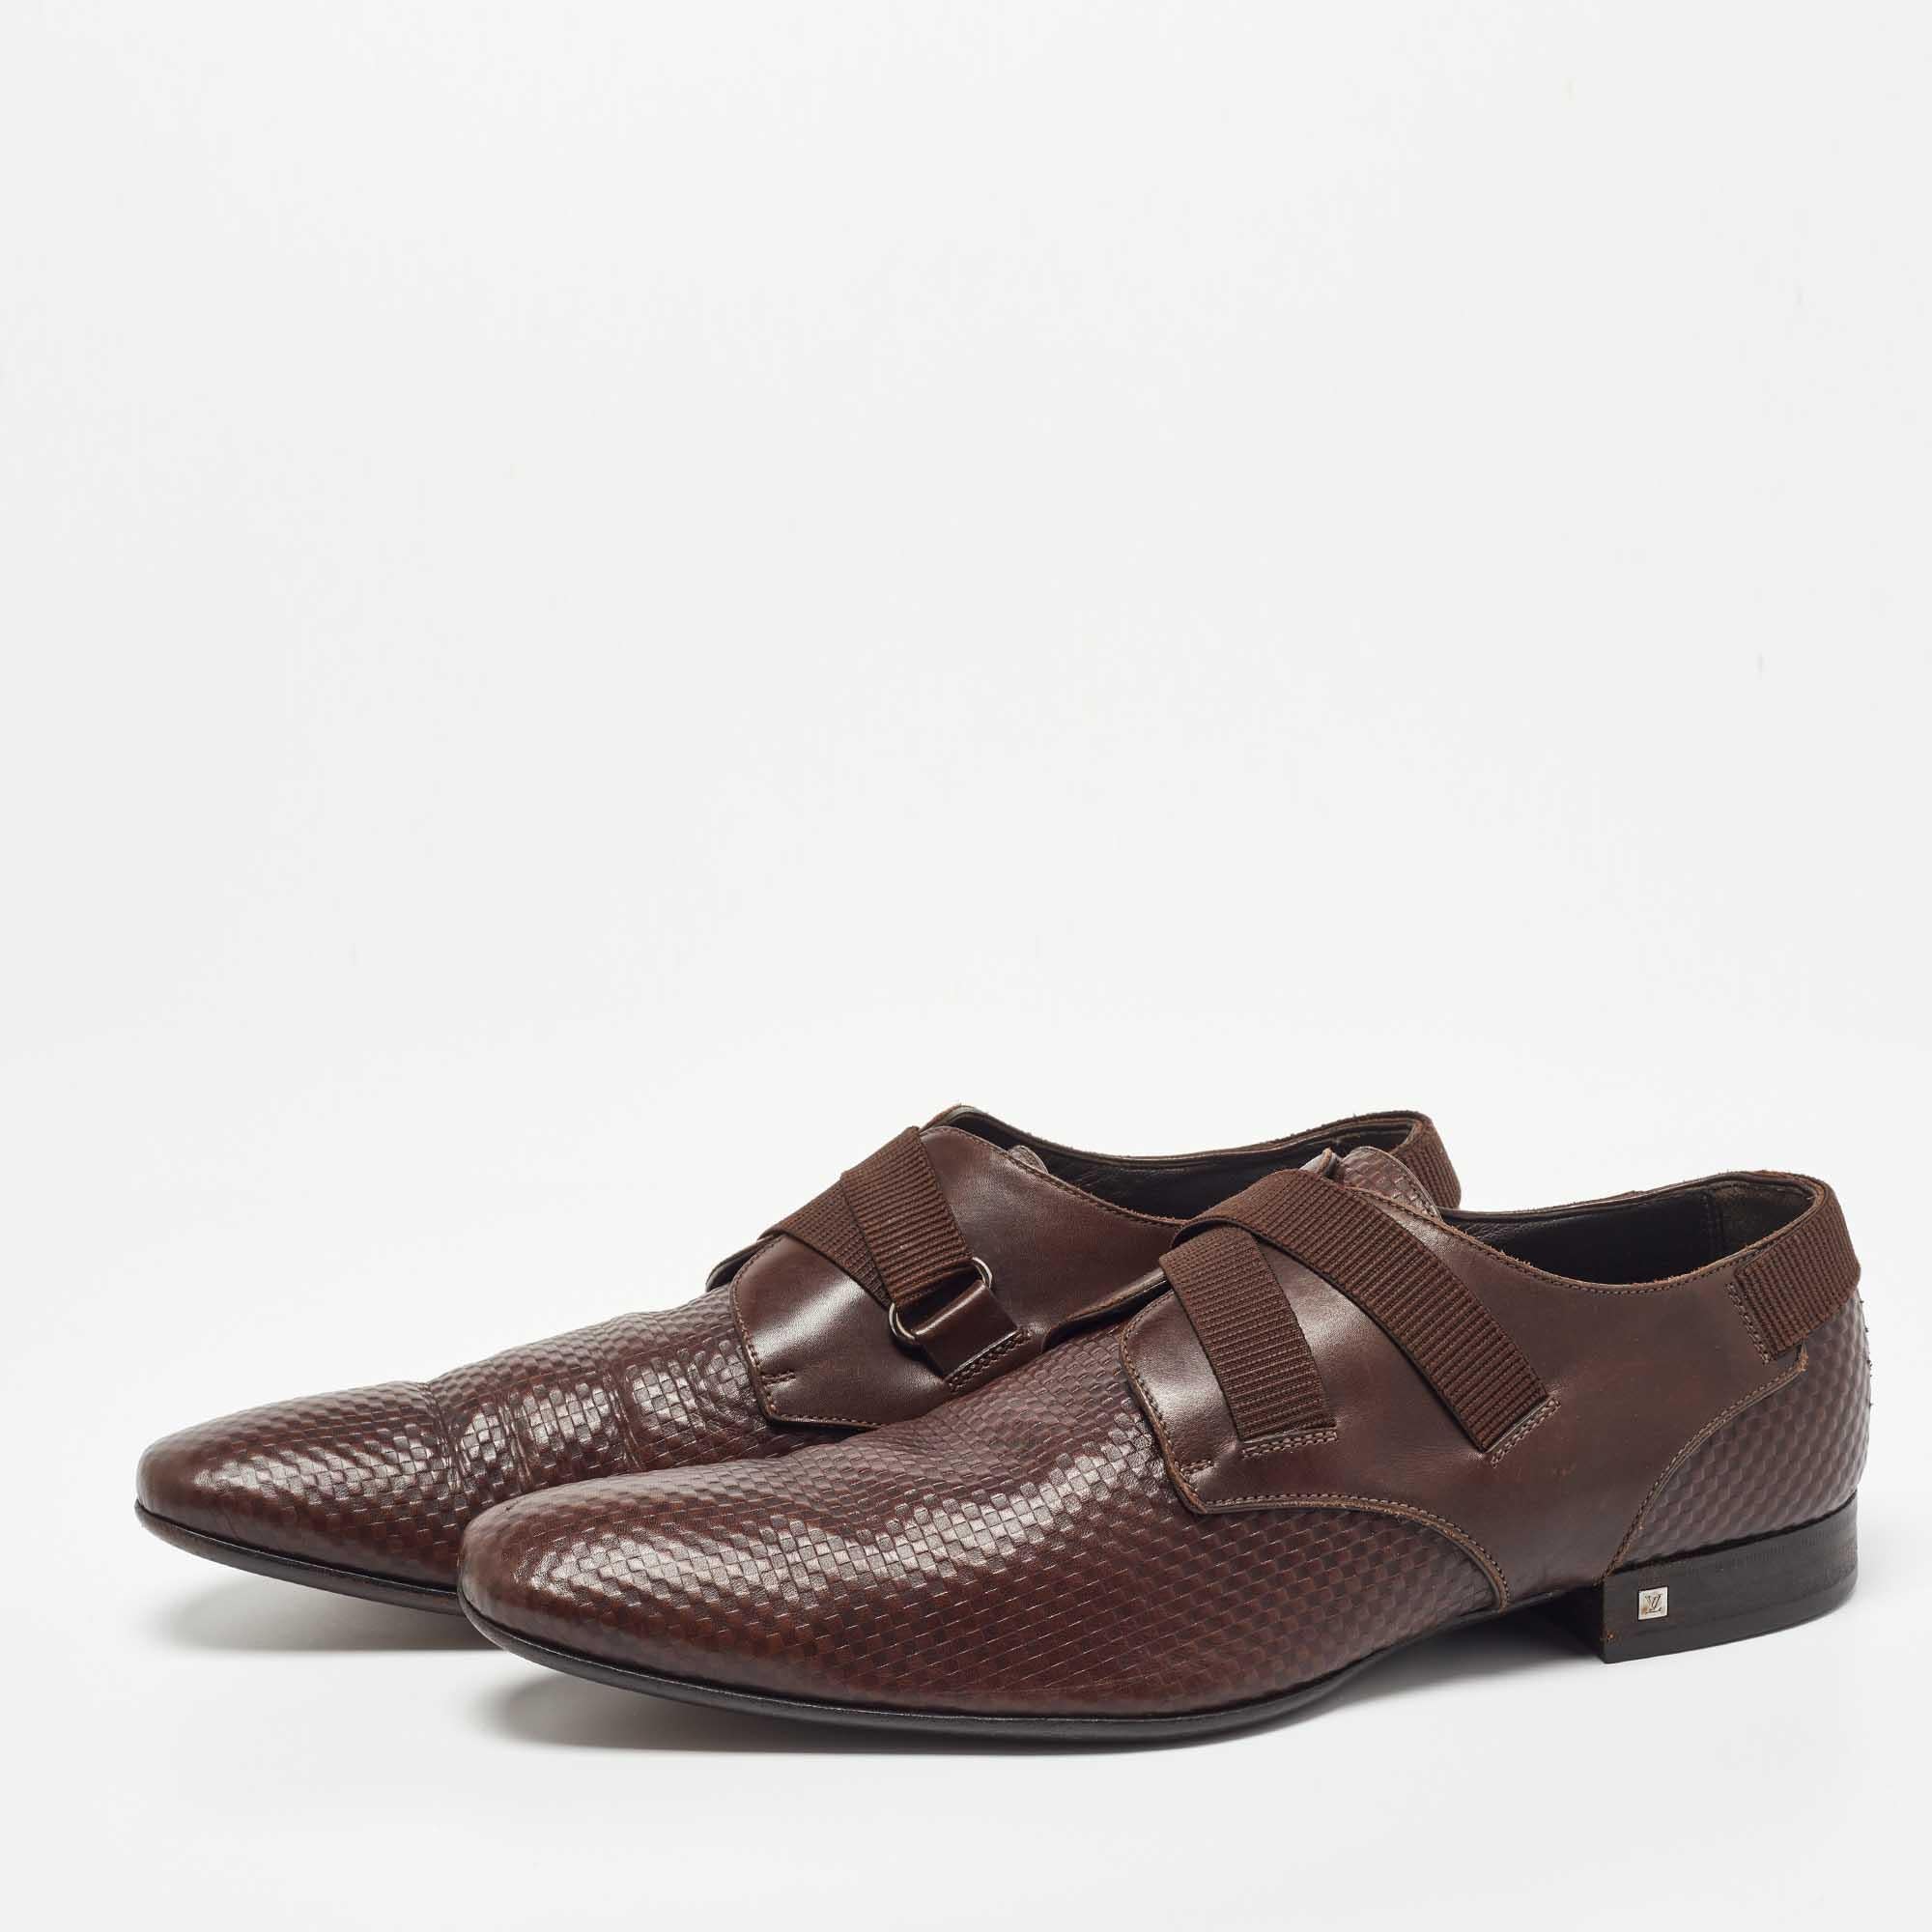 These Louis Vuitton derby shoes aim to deliver a fashionable result. Constructed using leather, these shoes are as durable as they are appealing.

